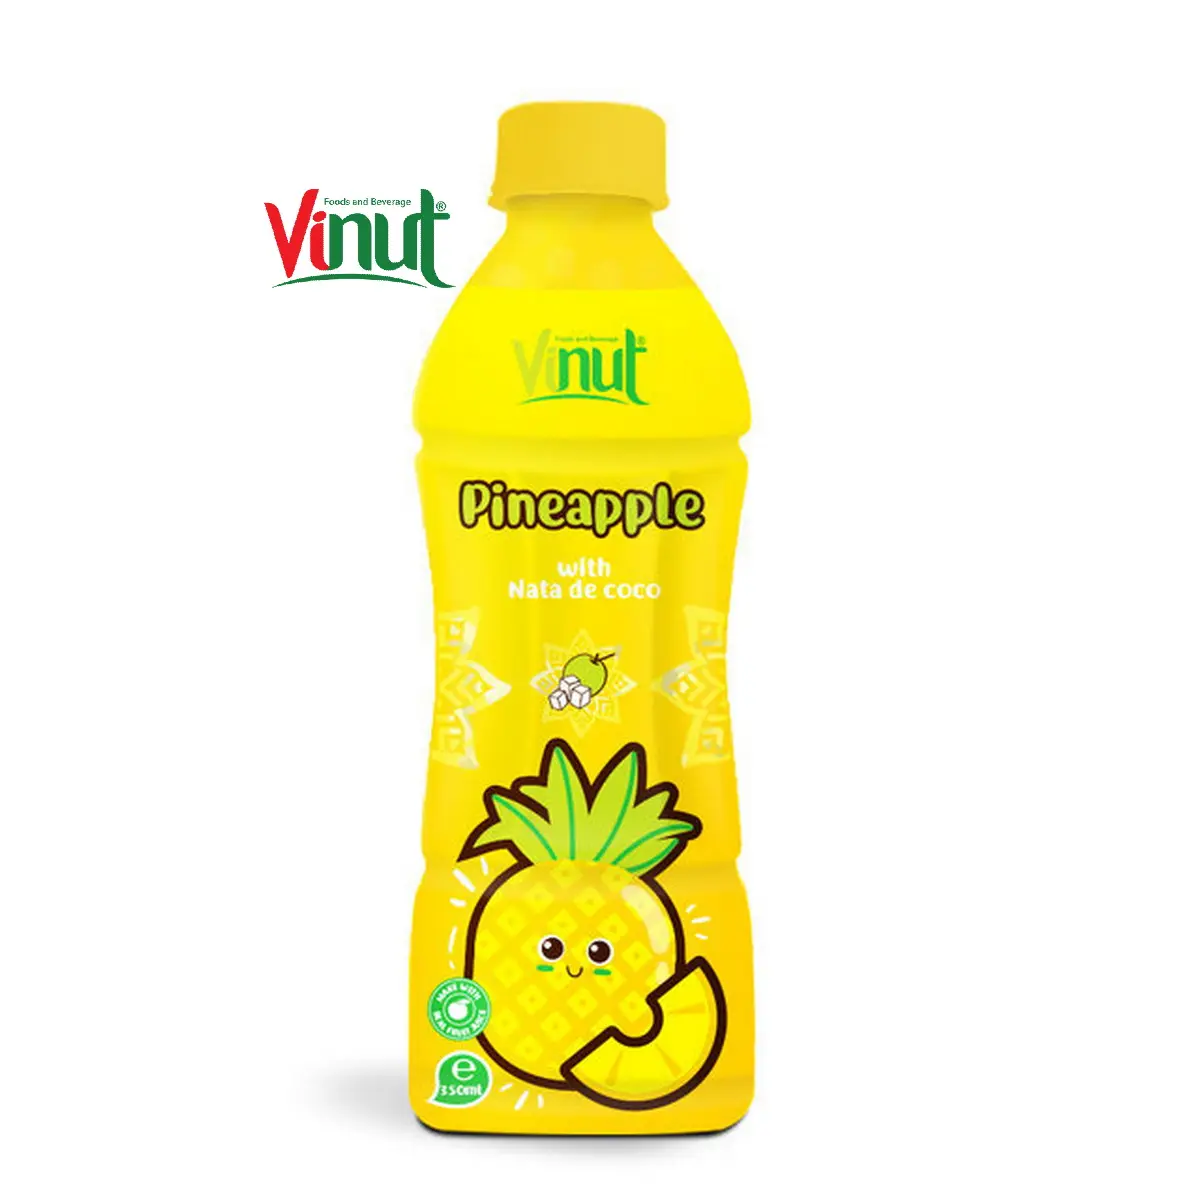 350ml Bottled Pineapple Juice with nata de coco Bottled Pineapple Juice with Nata De Coco Daily Drinks High Quality